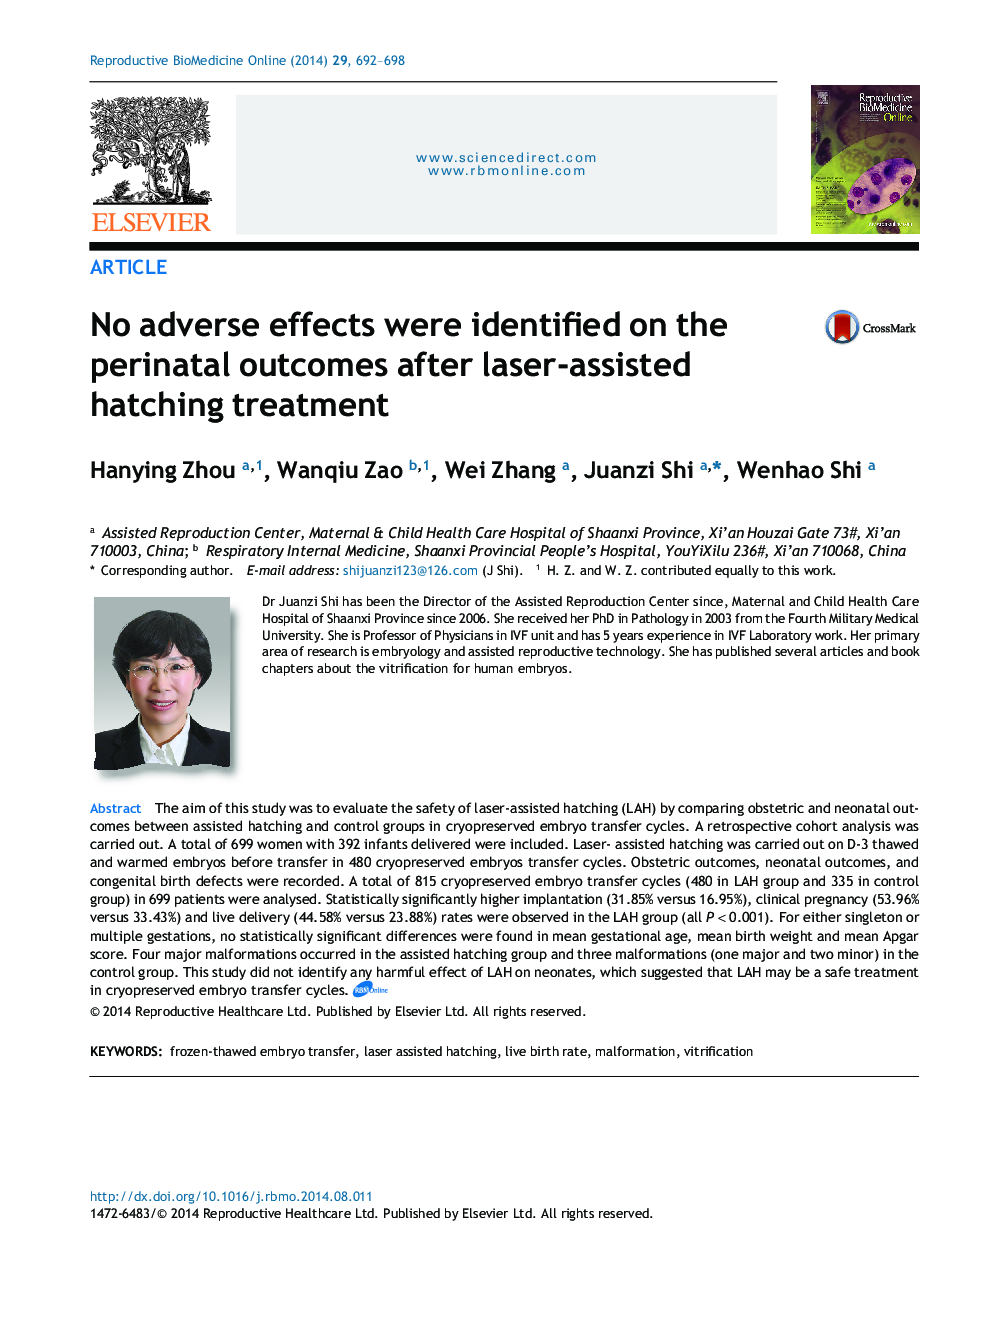 No adverse effects were identified on the perinatal outcomes after laser-assisted hatching treatment